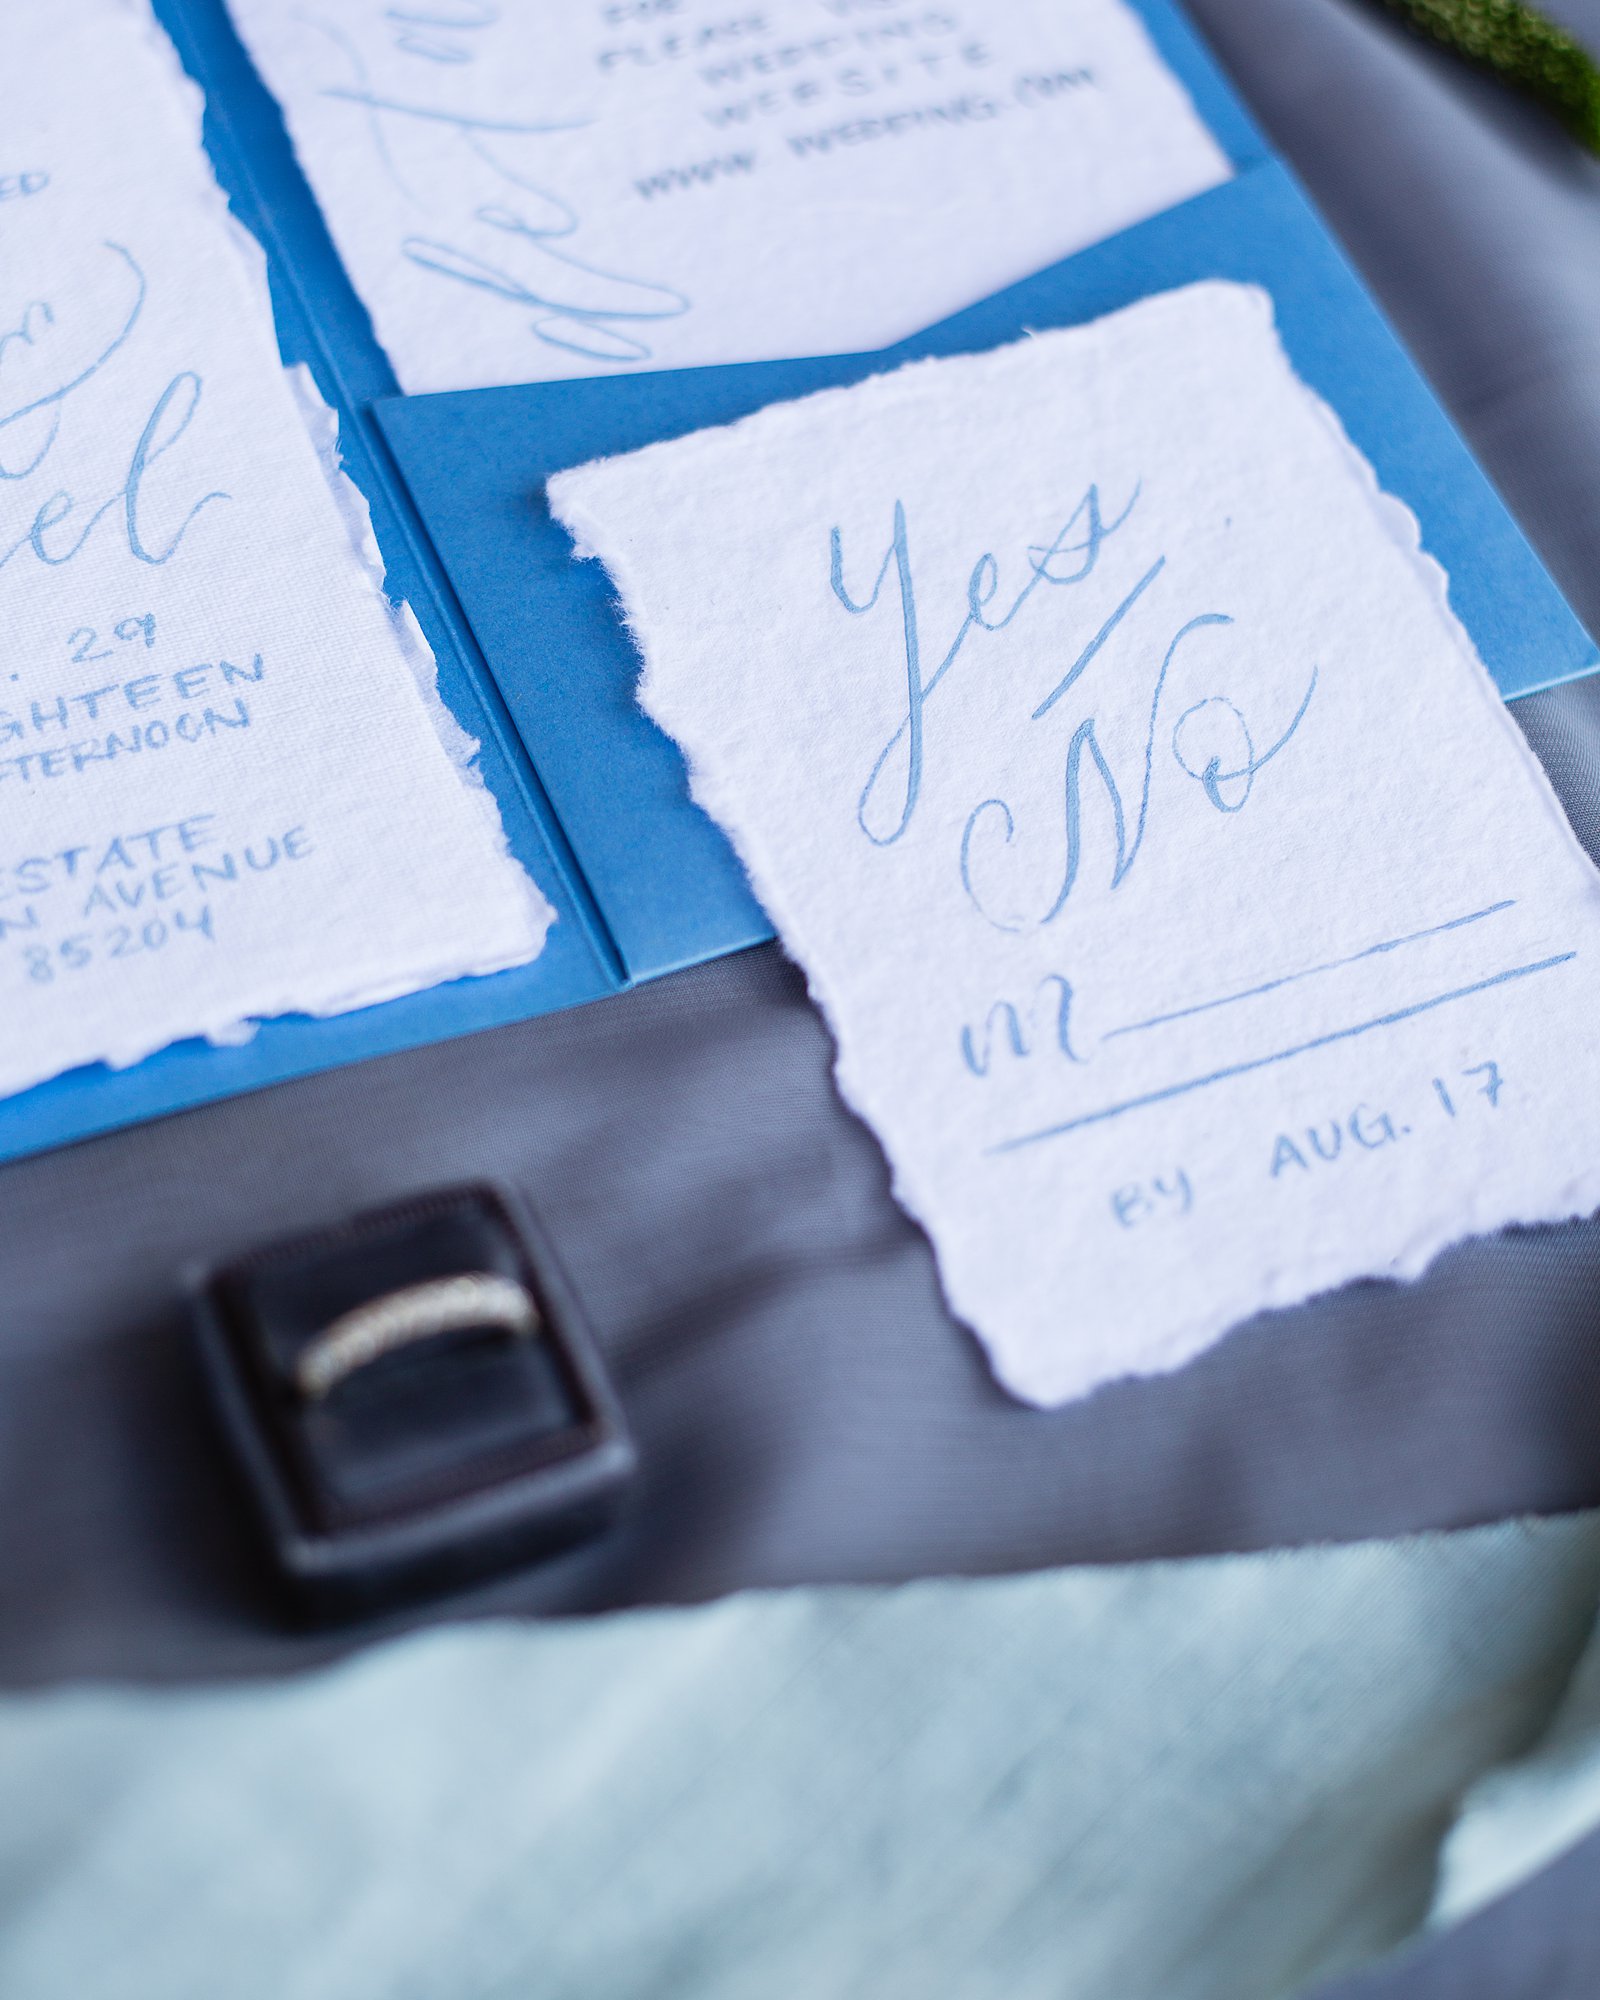 White and blue wedding invitations and stationary lay flat image by PMA Photography.